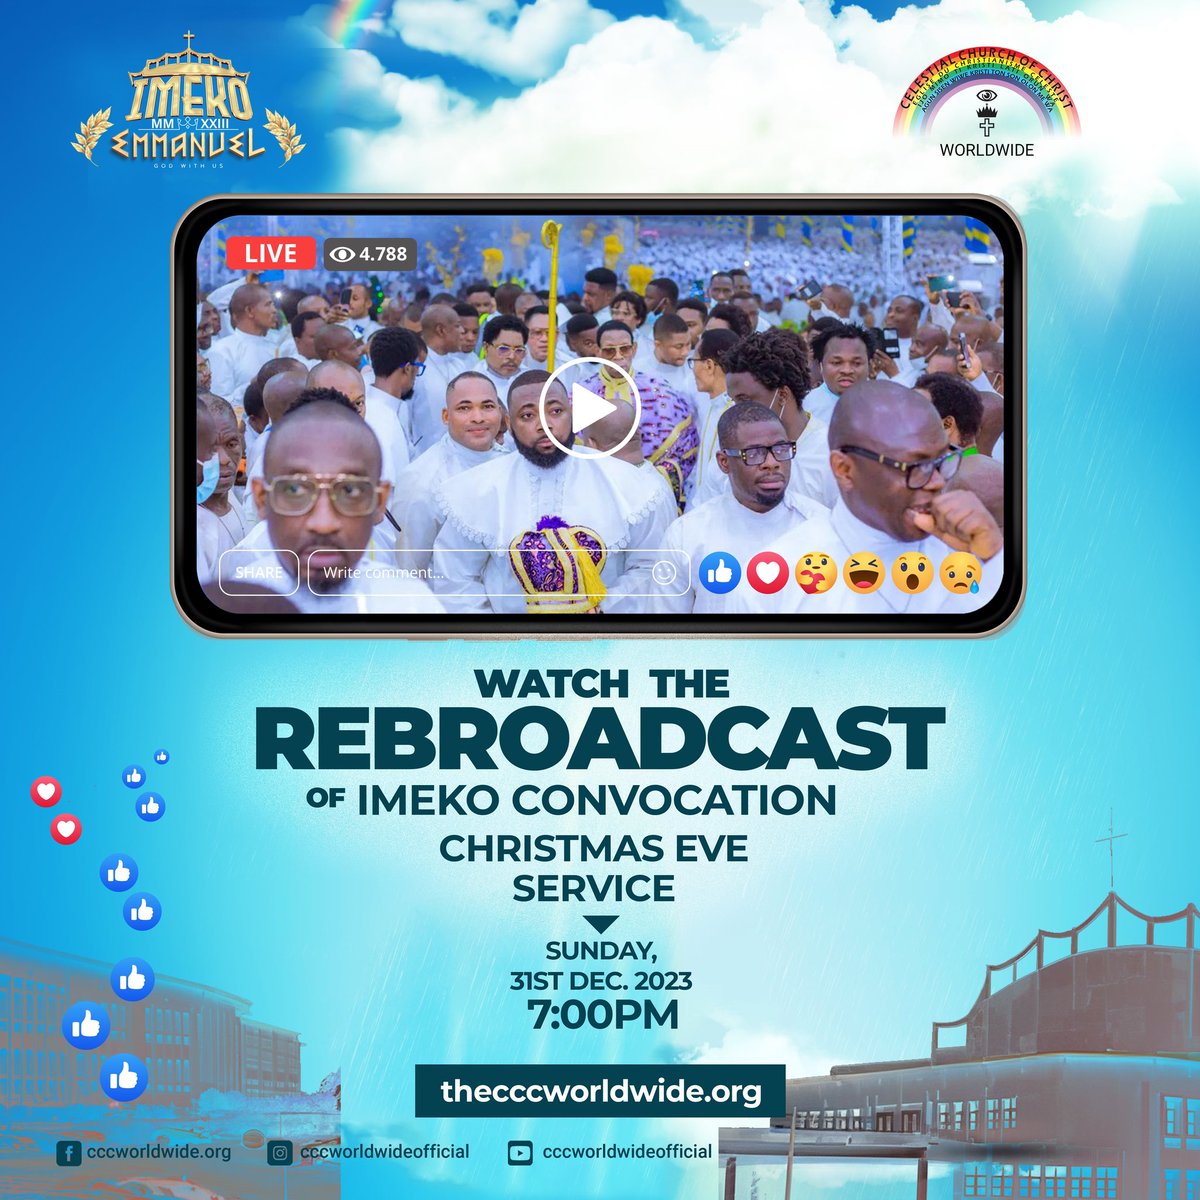 The Broadcast of the Christmas Eve service will be aired Live on social media as shown on the attached flyer, 7pm this sunday.
Kindly share this information and don't miss the broadcast.
#Imeko2023 #CCCWorldwideOfficial #Omocele #CelestialChurchOfChrist #christmas